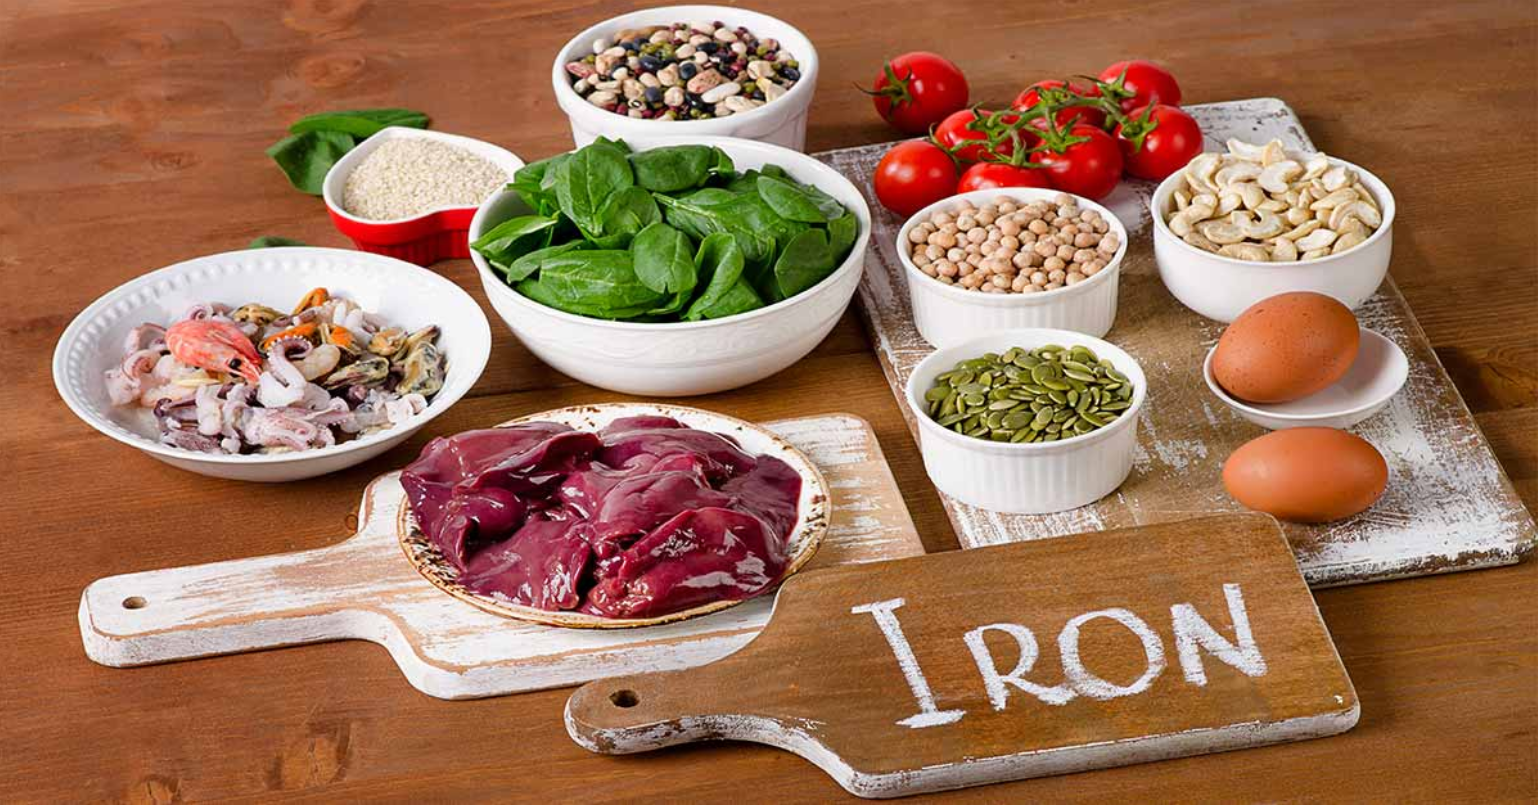 Sources of Iron